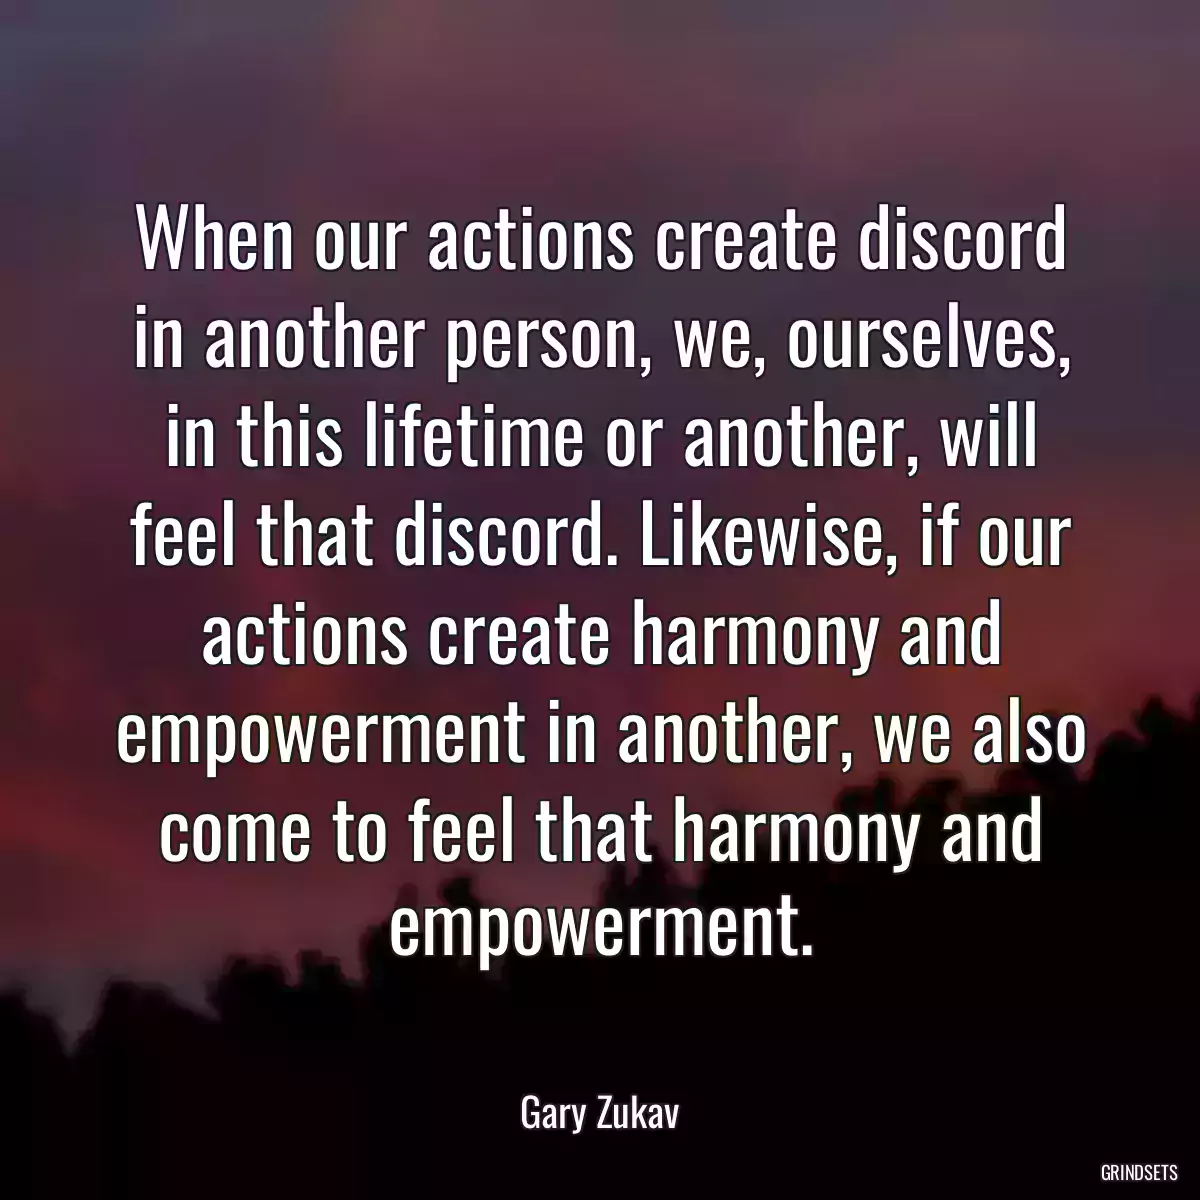 When our actions create discord in another person, we, ourselves, in this lifetime or another, will feel that discord. Likewise, if our actions create harmony and empowerment in another, we also come to feel that harmony and empowerment.